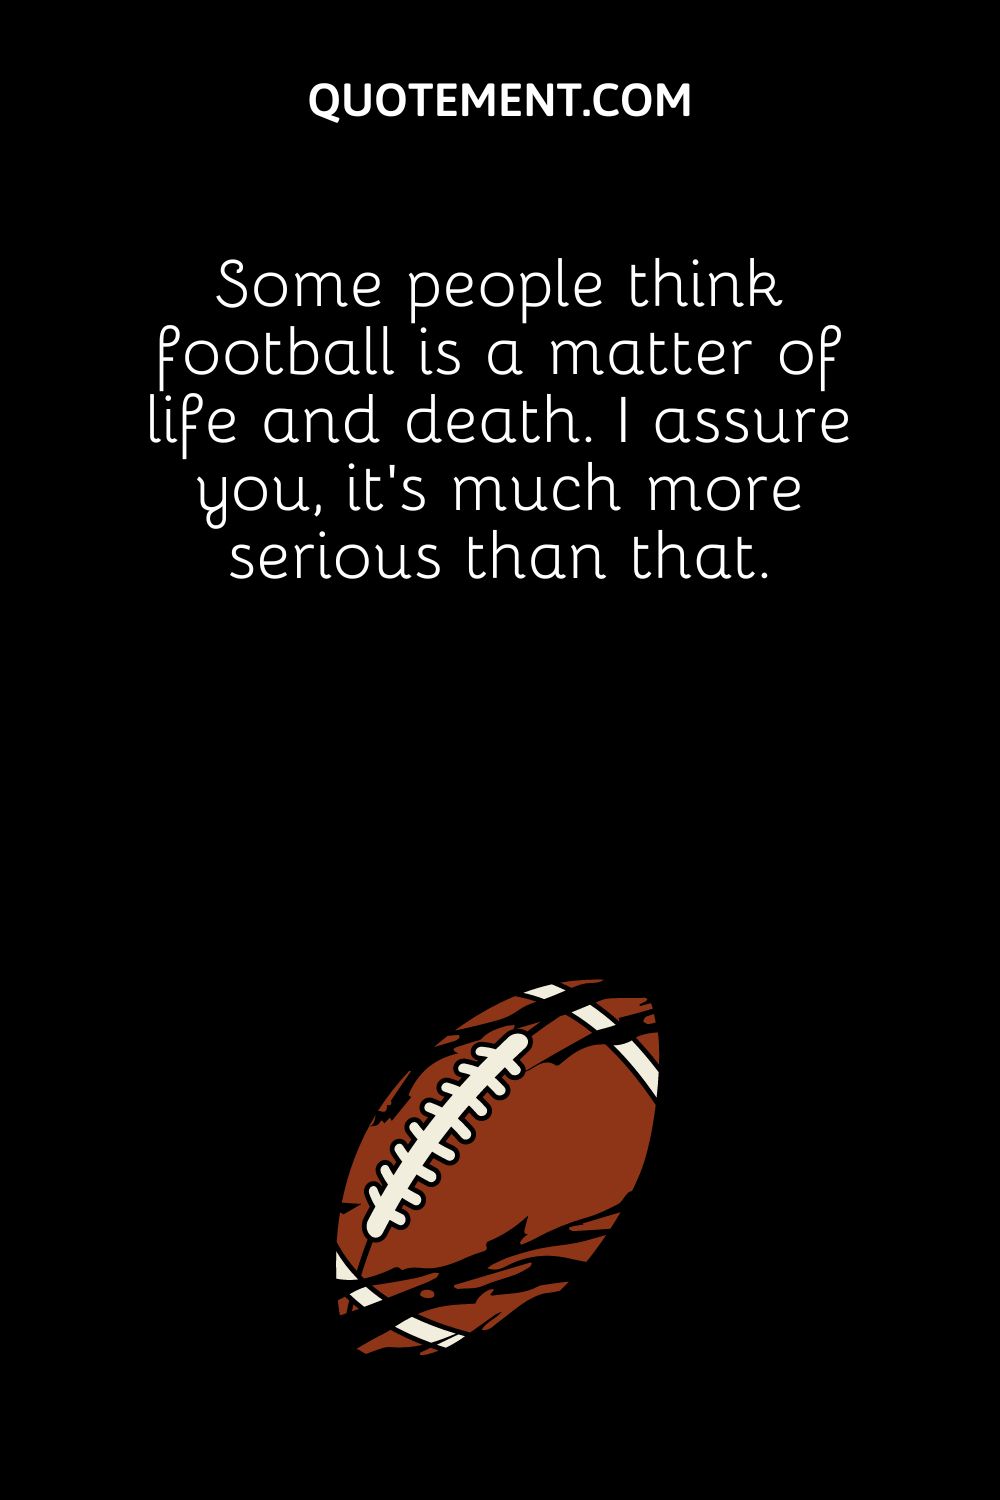 Some people think football is a matter of life and death